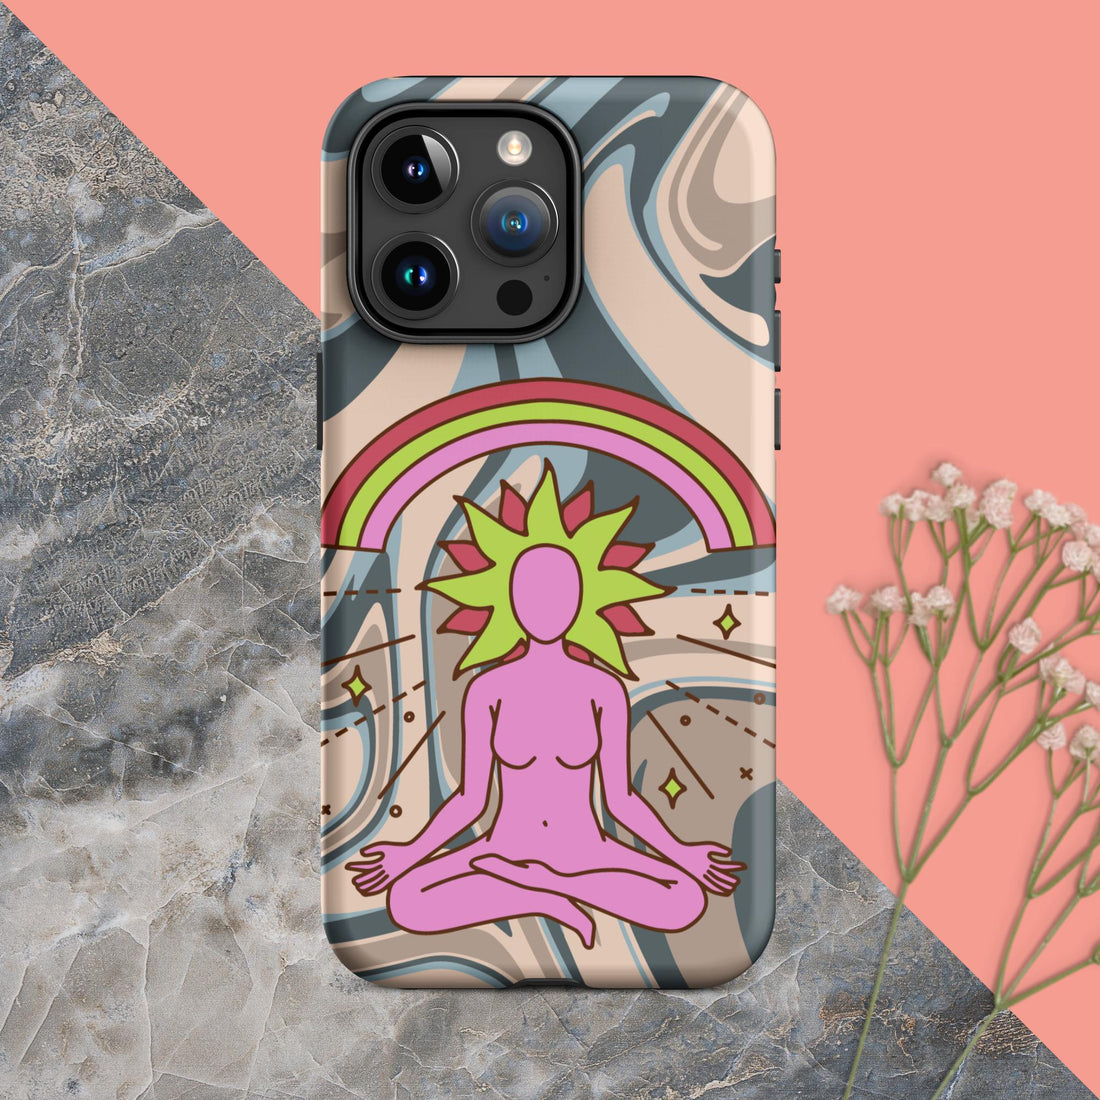 Shockproof Protective Iphone Case - Free Spirited, image, Iphone case 